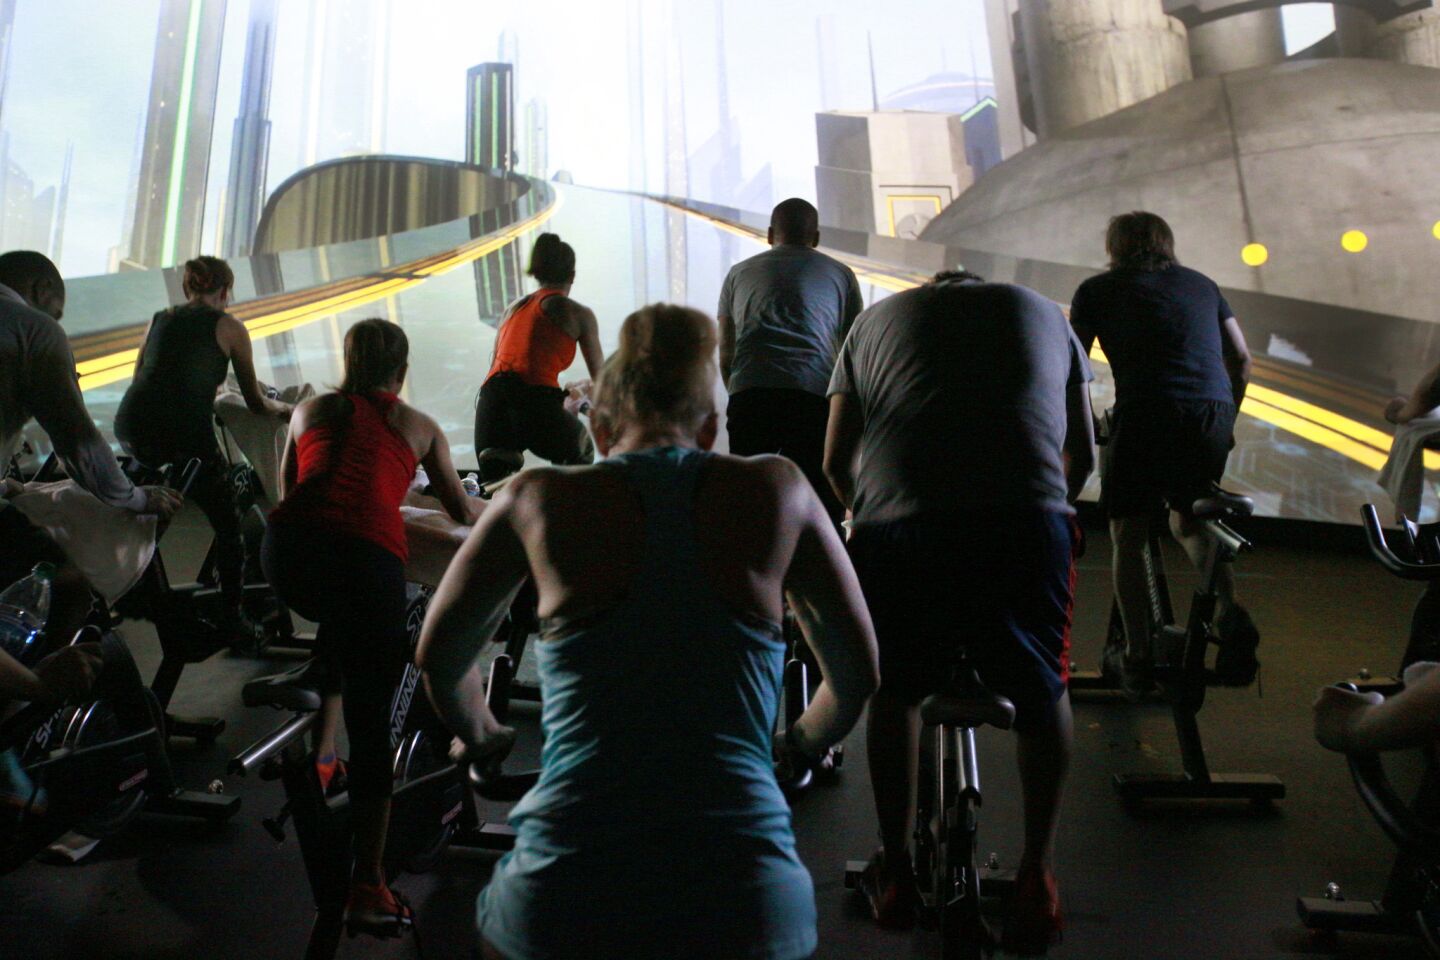 The Trip combines cinematic scenery with a cycling studio class